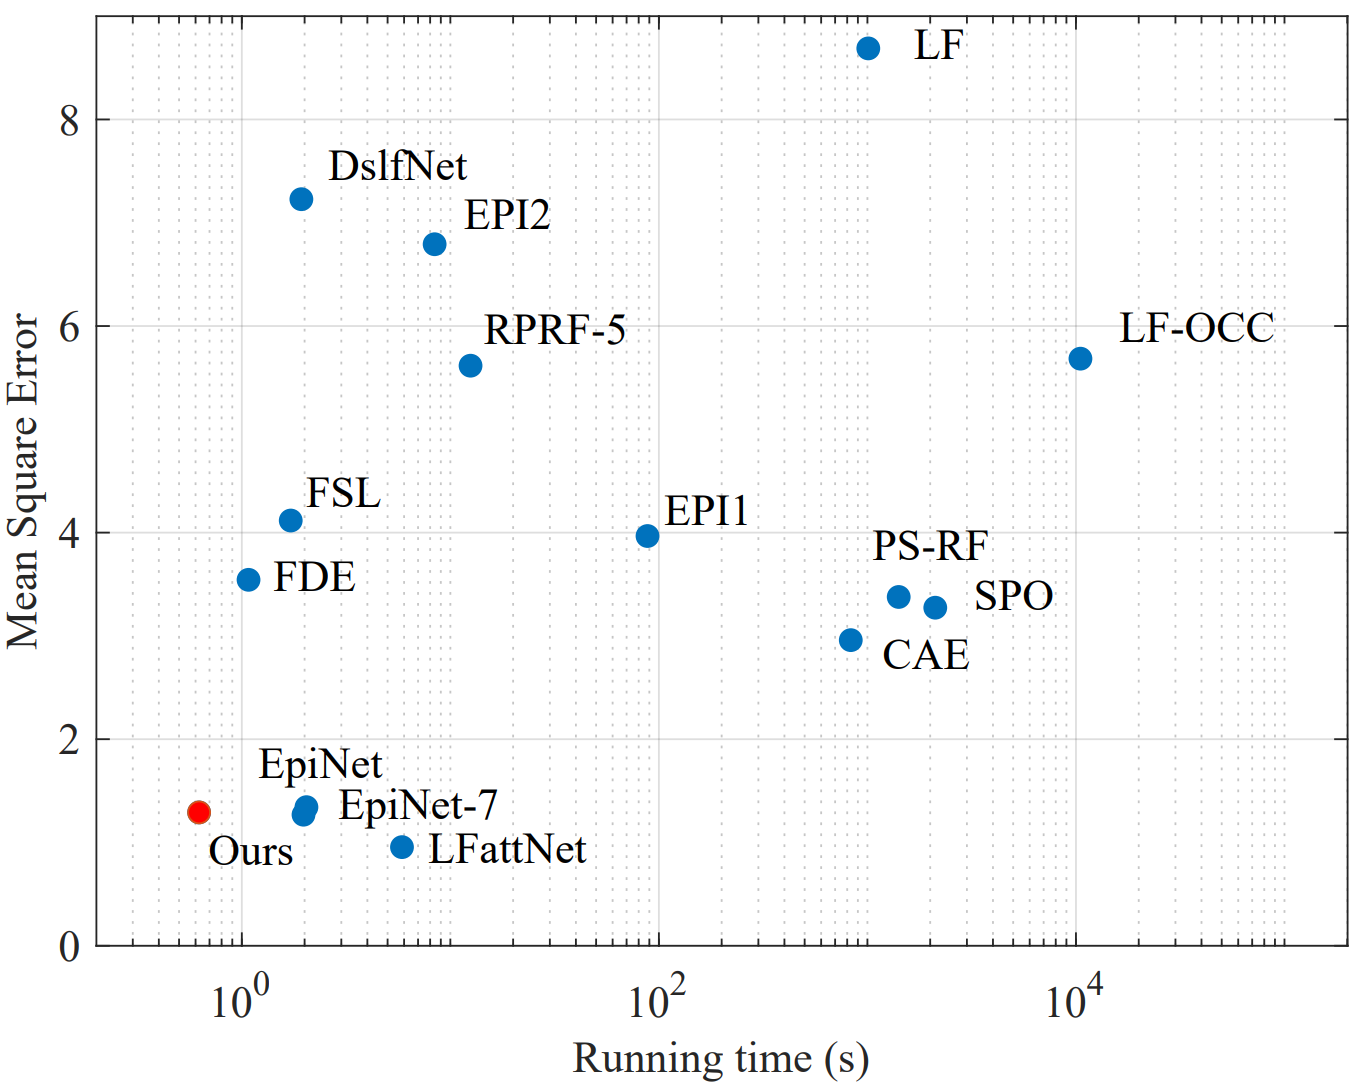 Figure 1. Comparison in performance and efficiency of light field disparity estimation algorithms on the 4D light field dataset.